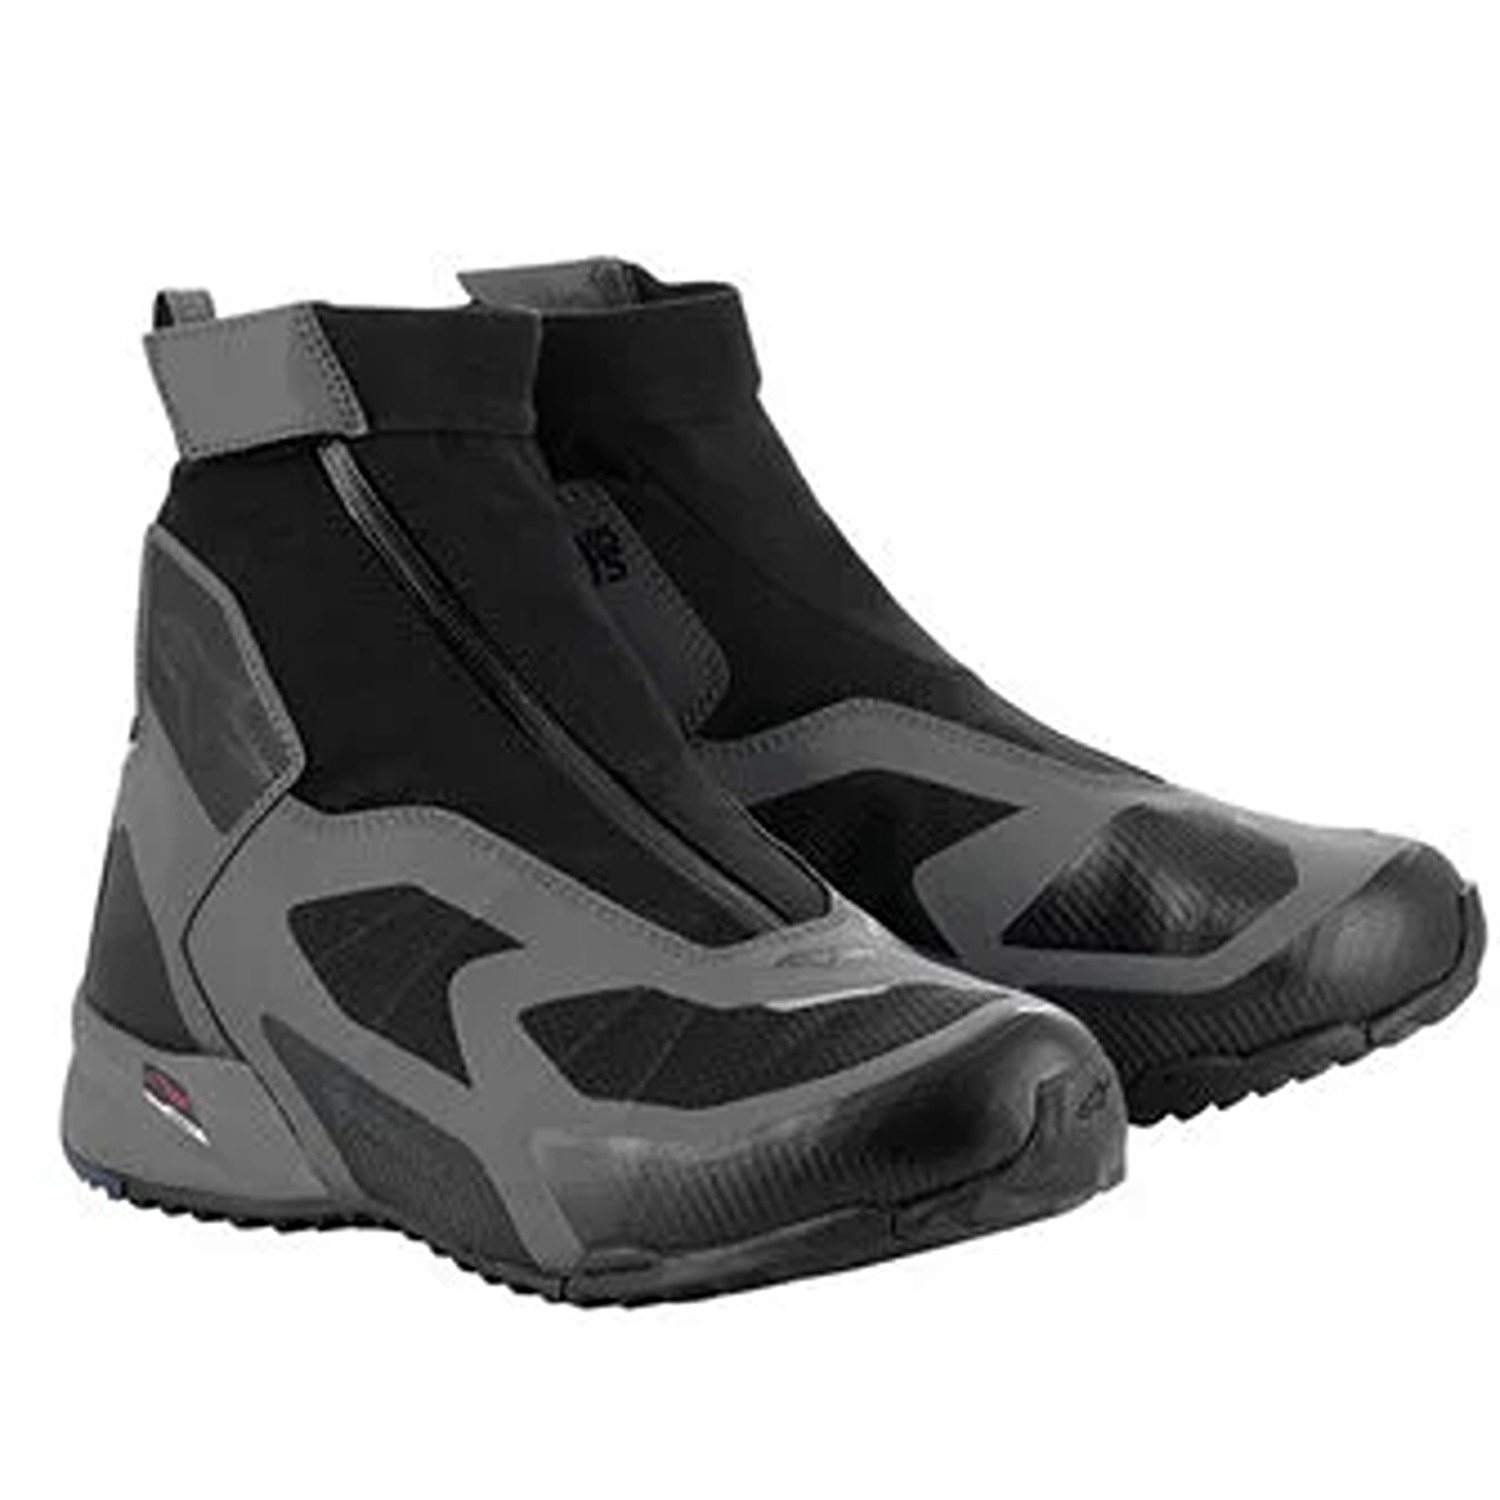 Image of Alpinestars CR-8 Gore-Tex Shoes Black Mid Gray Bright Red Size US 65 EN